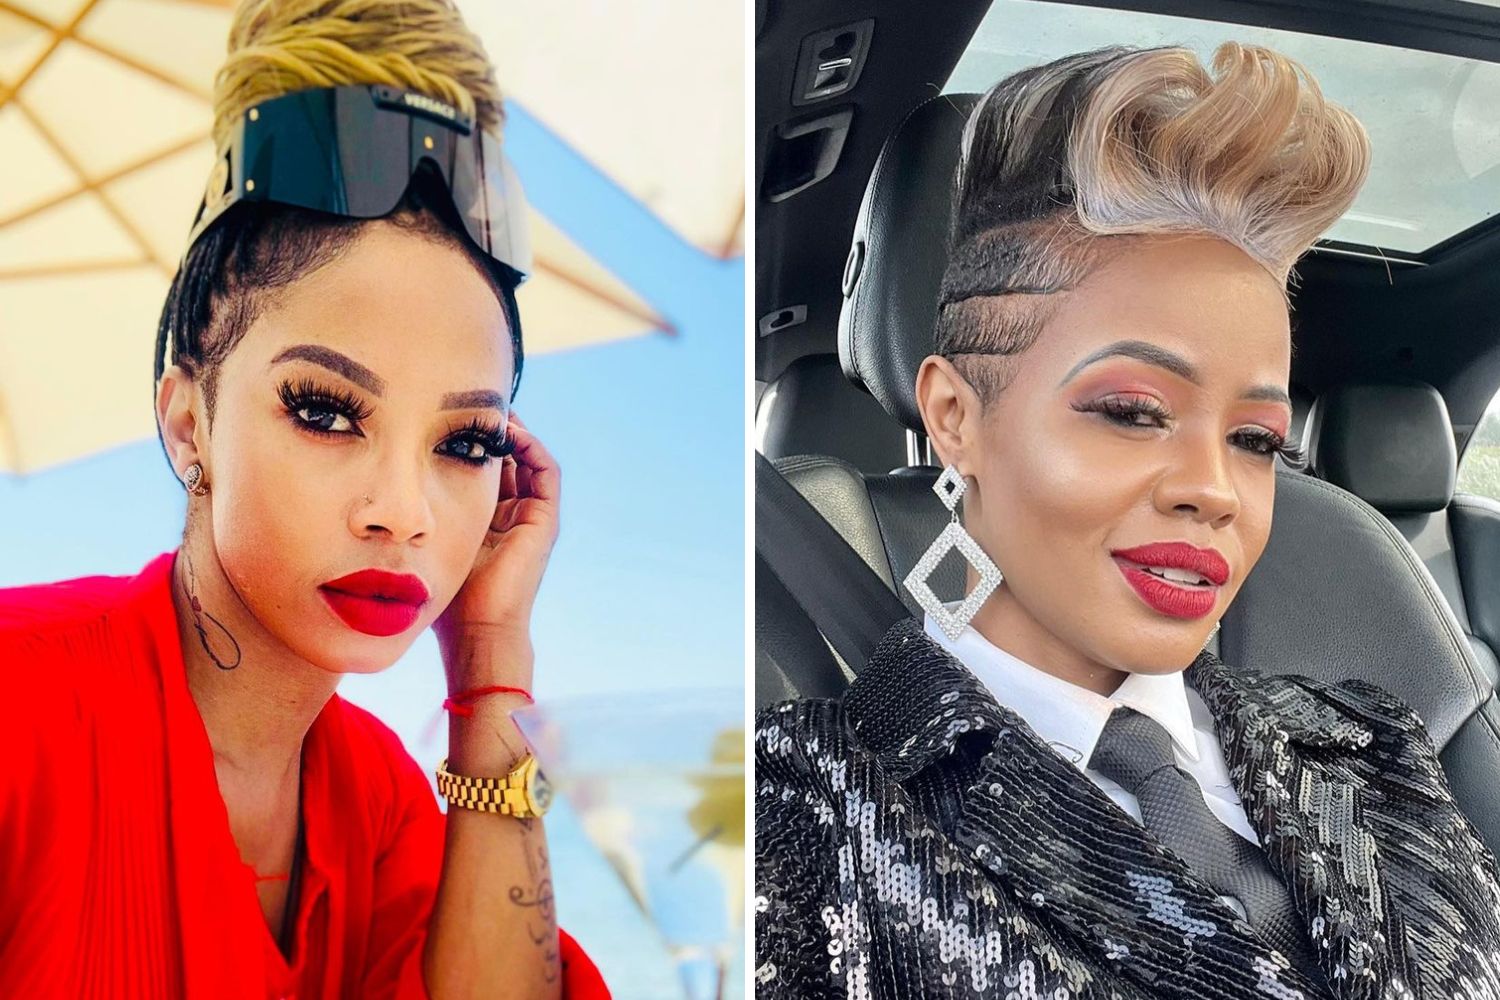 A Netflix deal worth R22 million between Kelly Khumalo and Zandile Khumalo has sparked outrage.